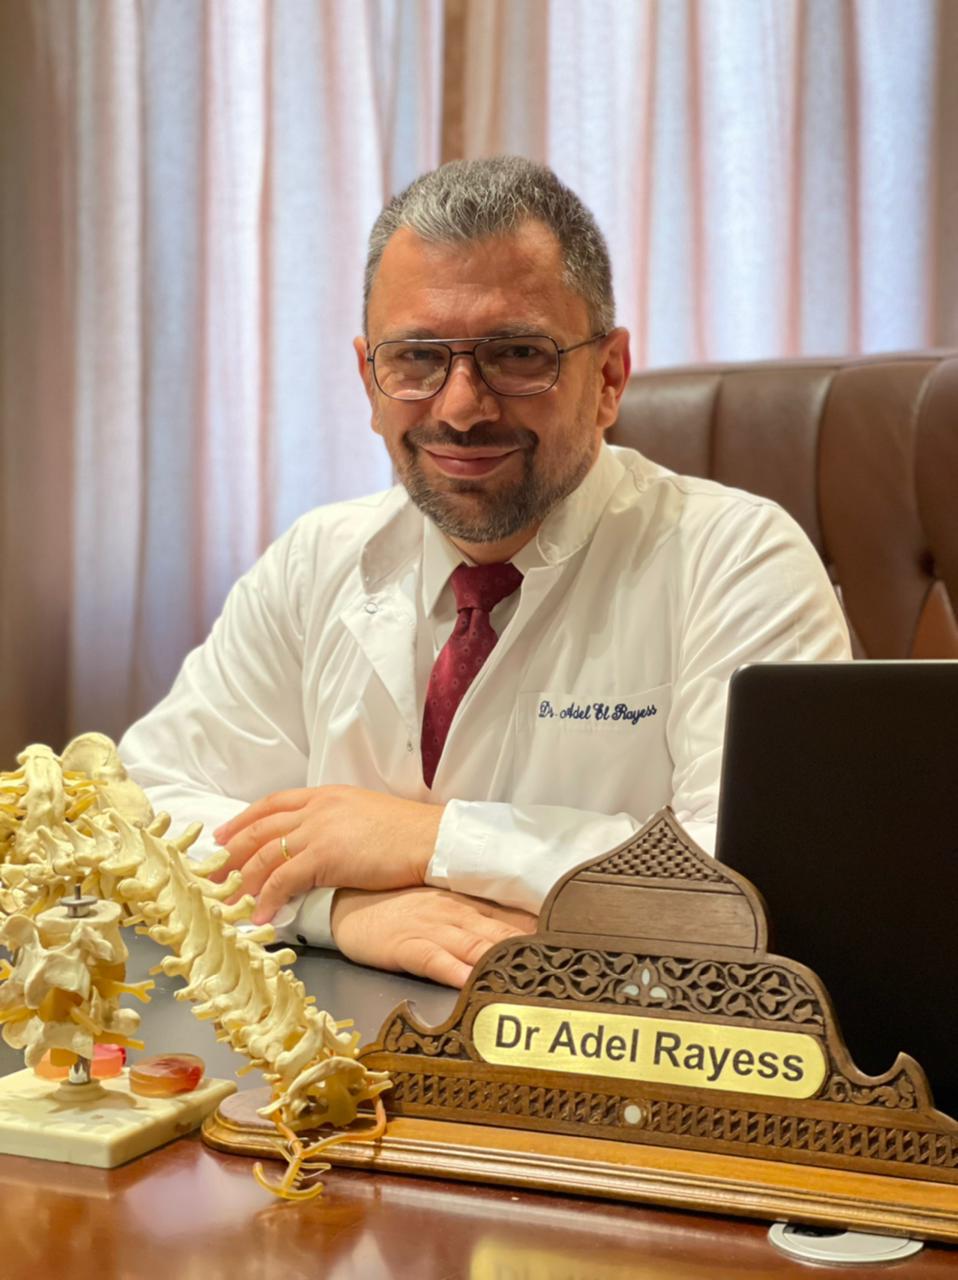 Adel Rayess, one of the best Osteopaths in the Middle East